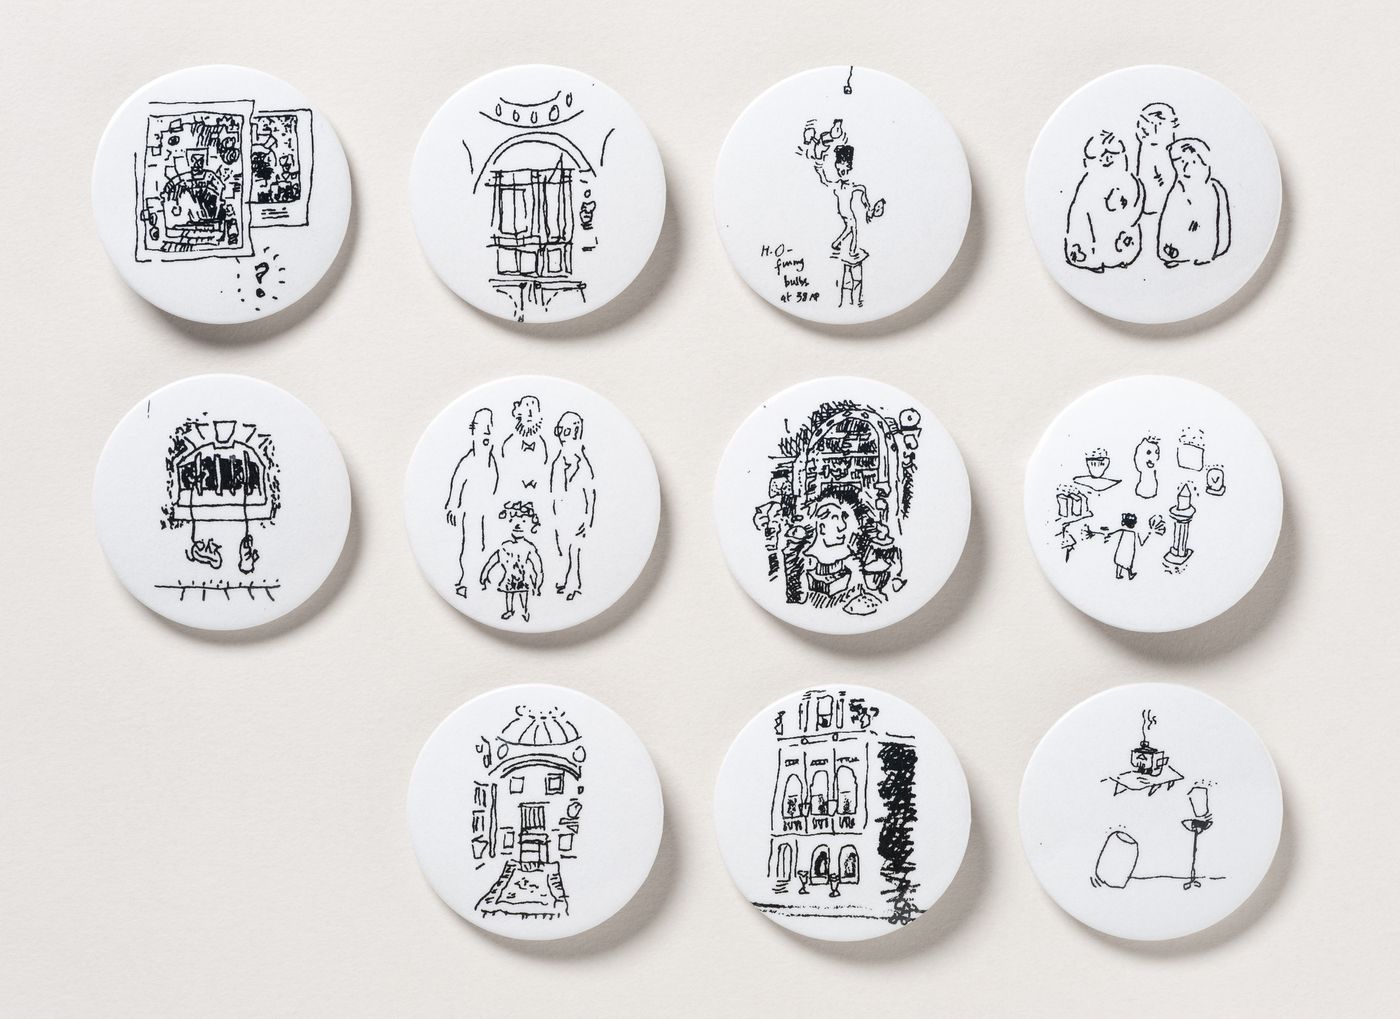 Sane: pins designed by Cedric Price for the exhibition "Retrace Your Steps: Remember Tomorrow" held at Sir John Soane's Museum, London, England, from December 10, 1999 to March 25, 2000